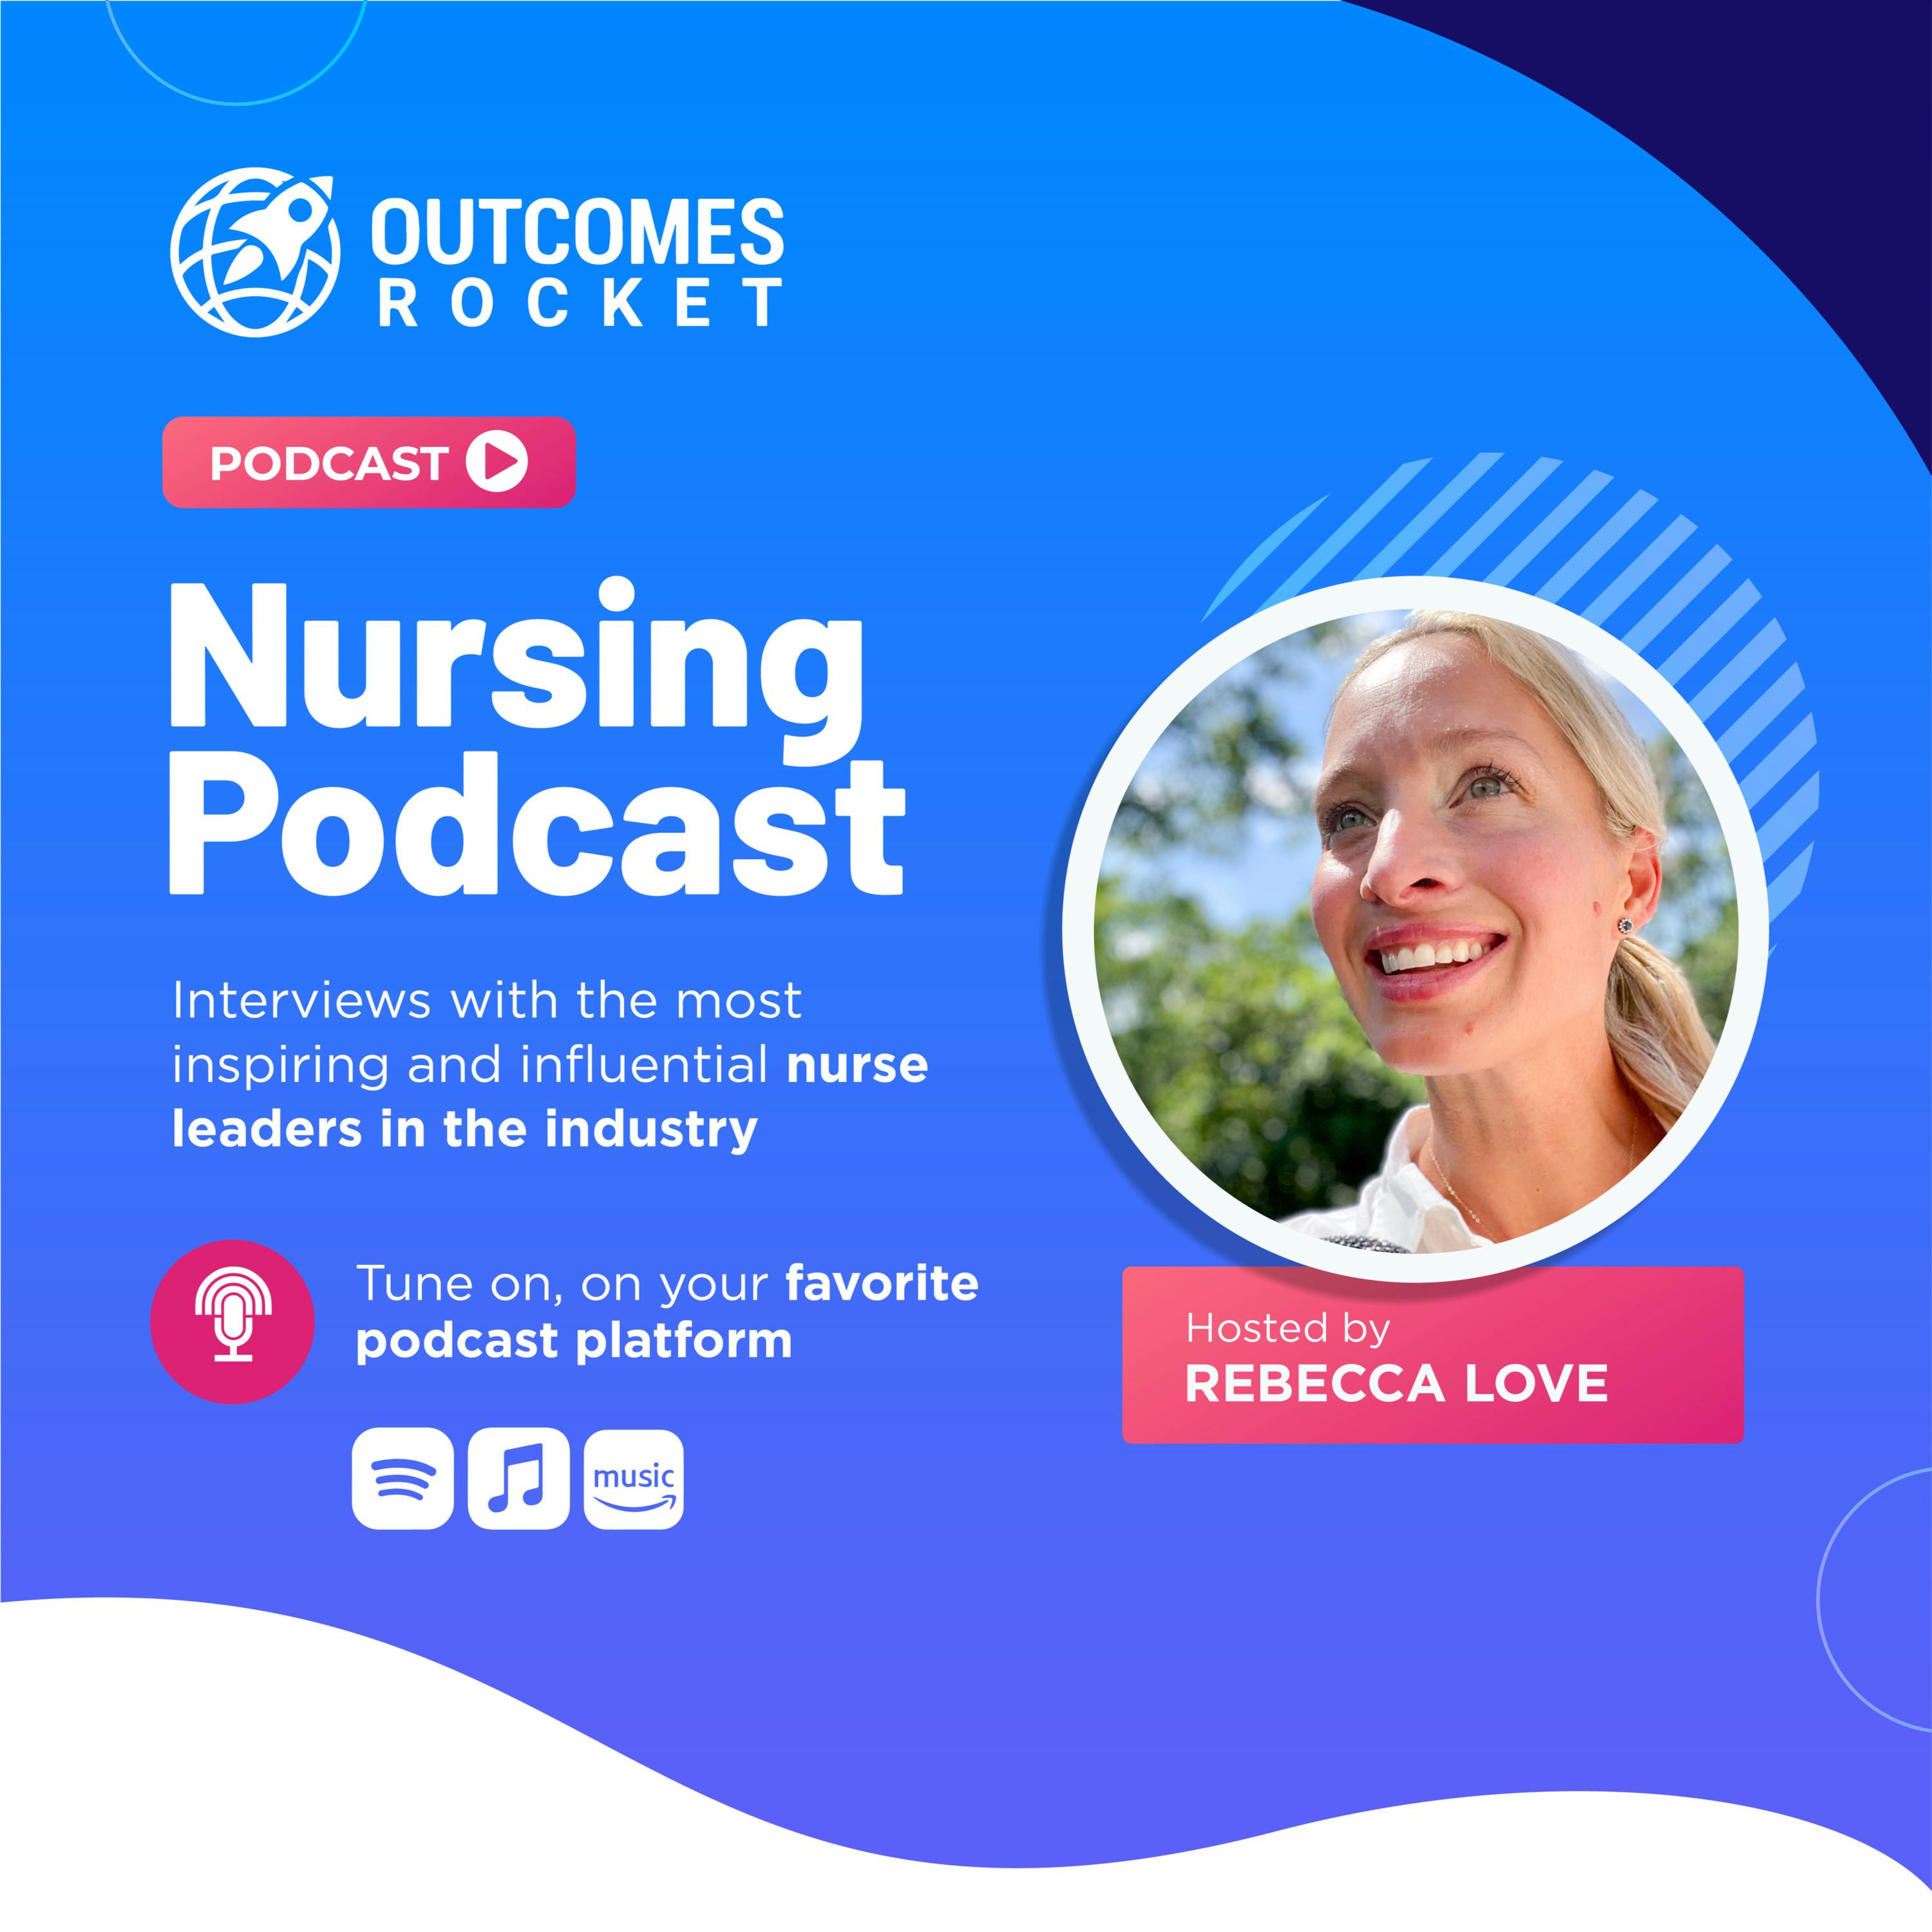 Advocating Advanced Learning Among Nurses and Nurse Leaders with Trish Richardson, Director of Post-Acute Care Solutions at Relias